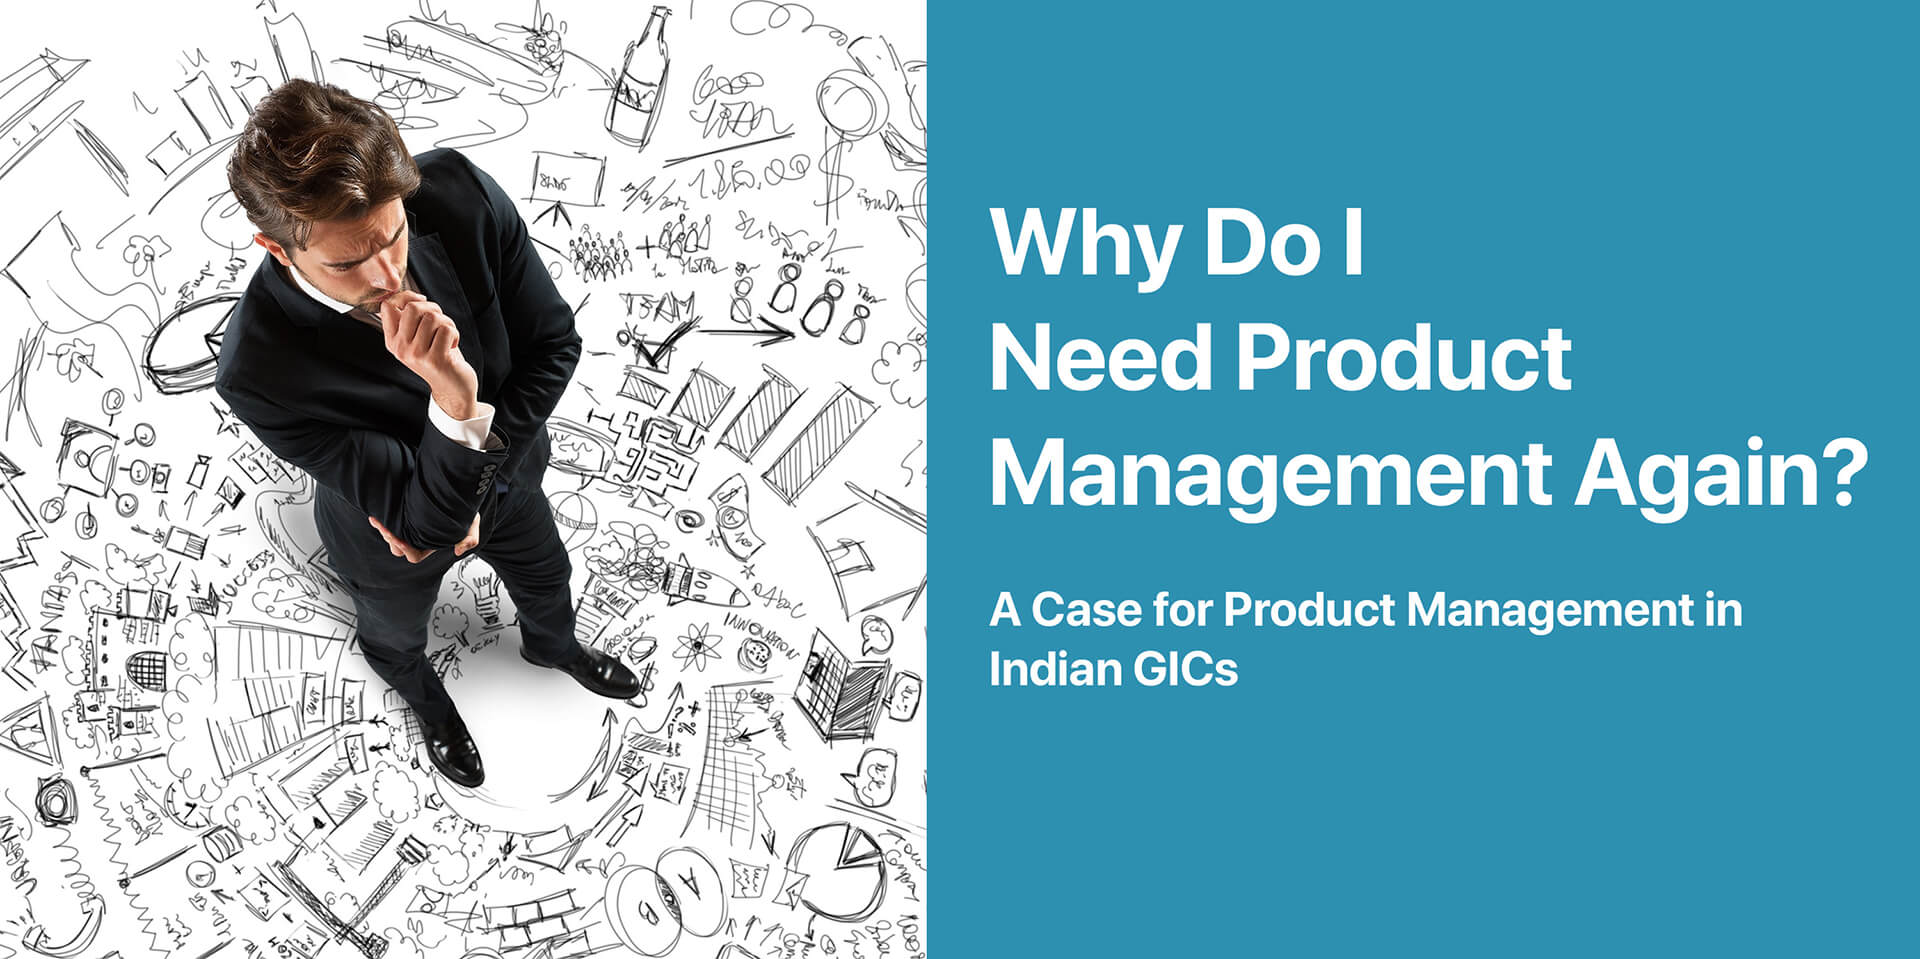 Product management in Indian GICs